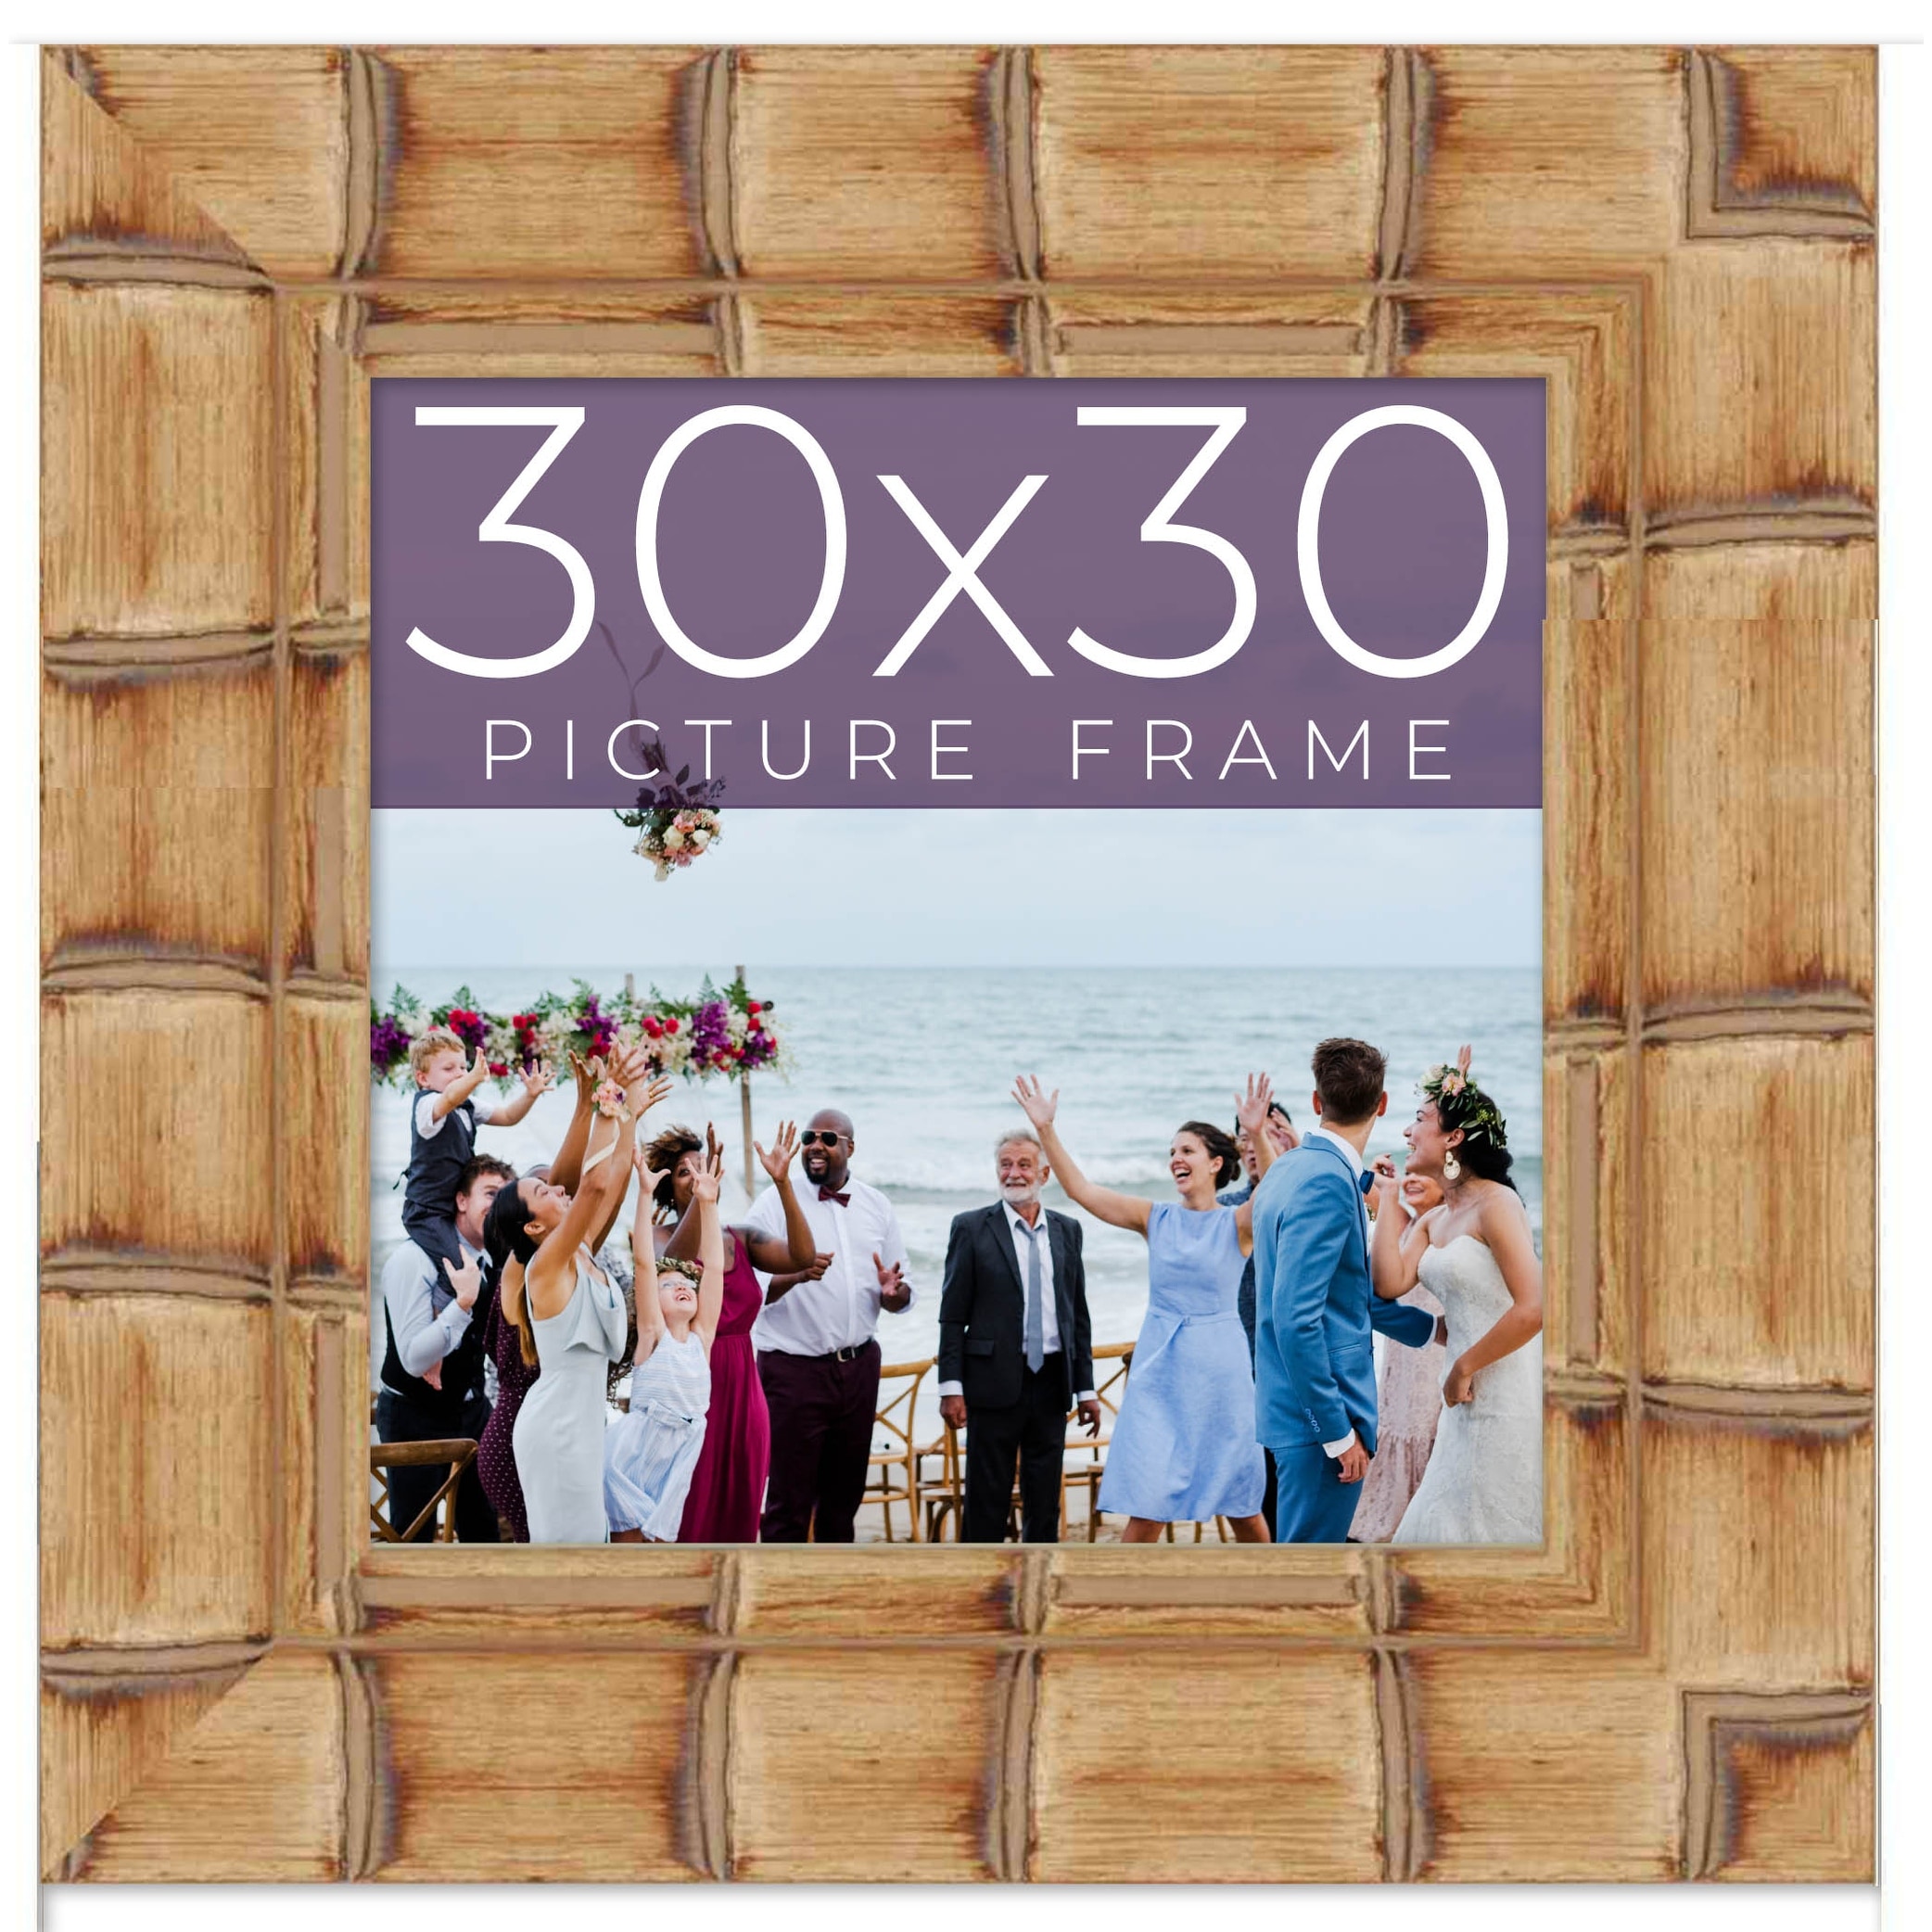 30x30 Brown Picture Frame - Wood Picture Frame Complete with UV - On Sale -  Bed Bath & Beyond - 36012777